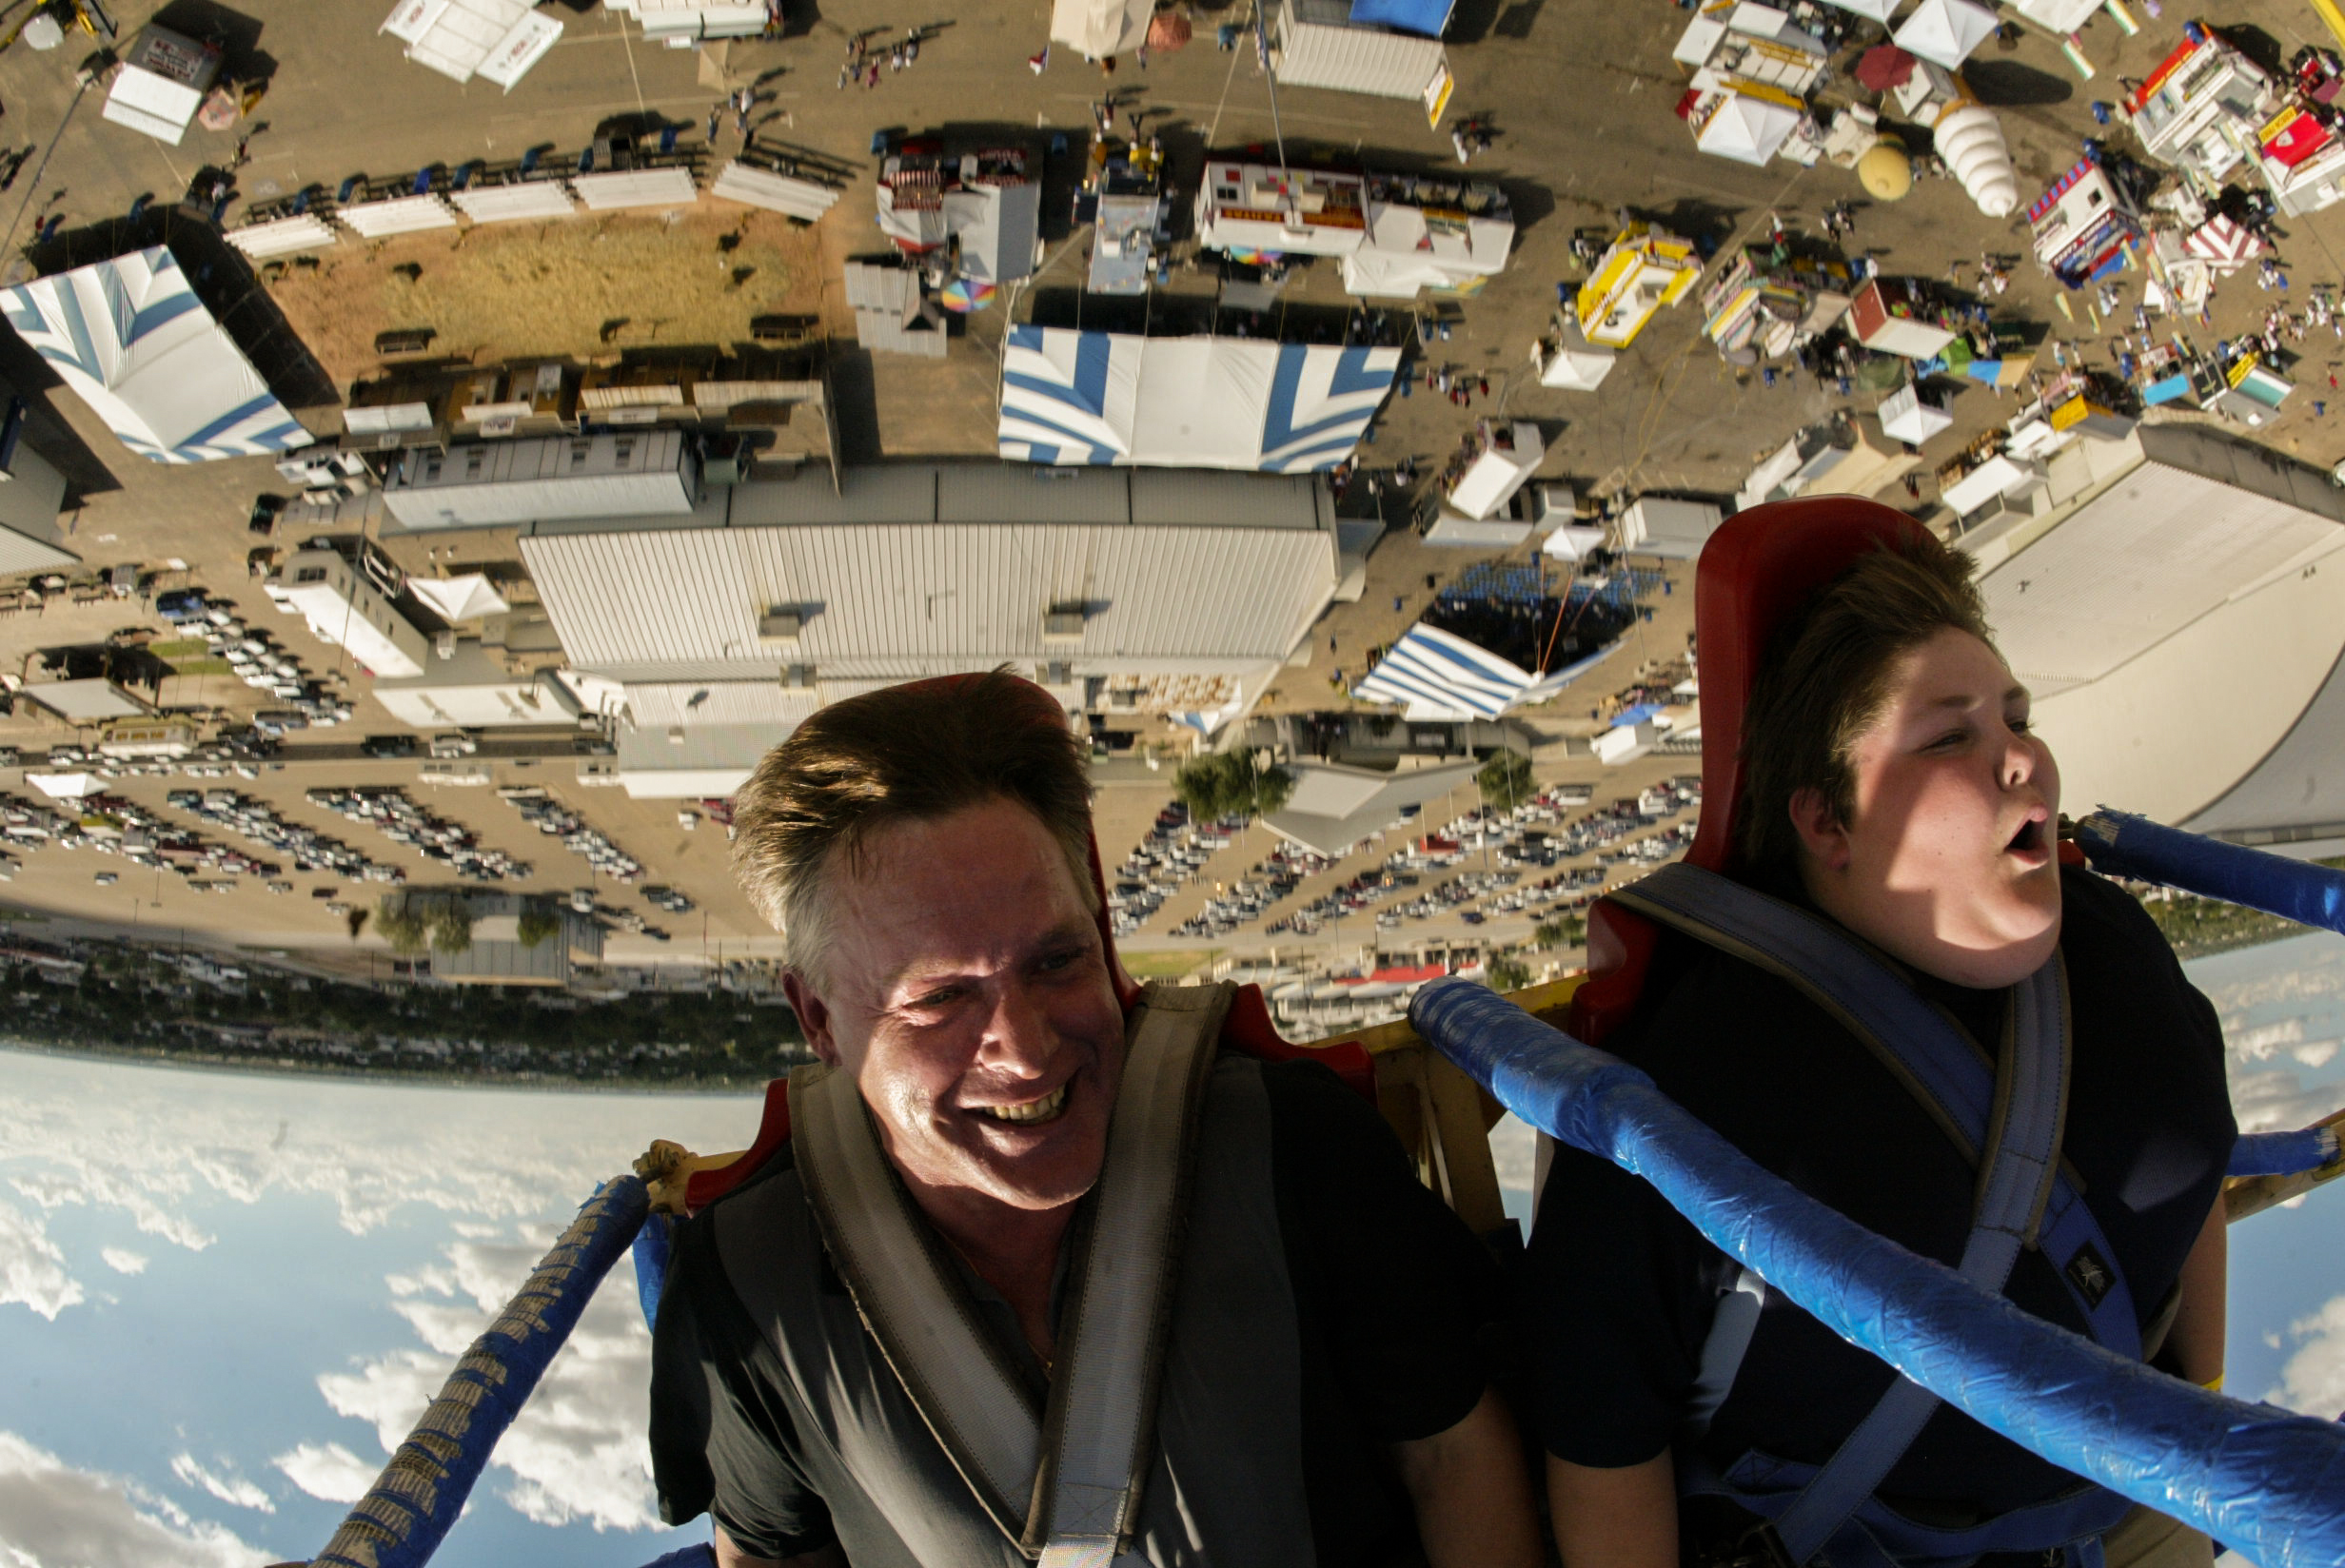  Friends Rob Mann, left, and Garrett Davis, 14, ride the Ejection Seat during the Permian Basin Fair & Exposition Sept. 13, 2008, at the Ector County Coliseum in Odessa, Texas. Riders strapped to the seat are shot about 180 feet into the air on the i